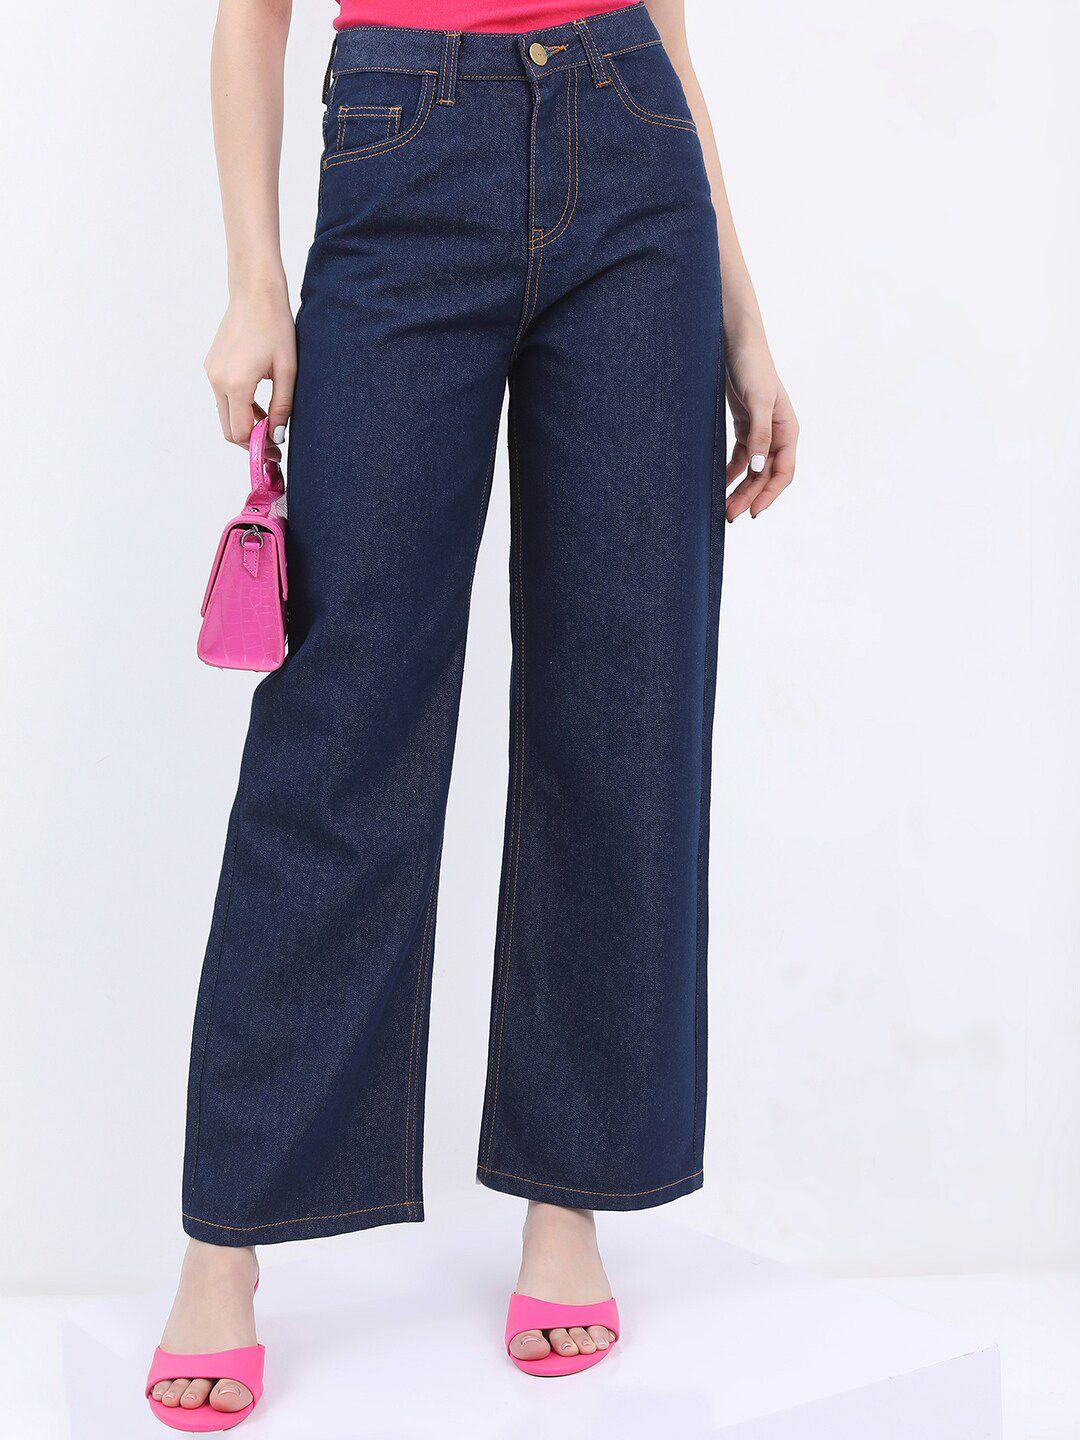 ketch-women-mid-rise-flared-jeans